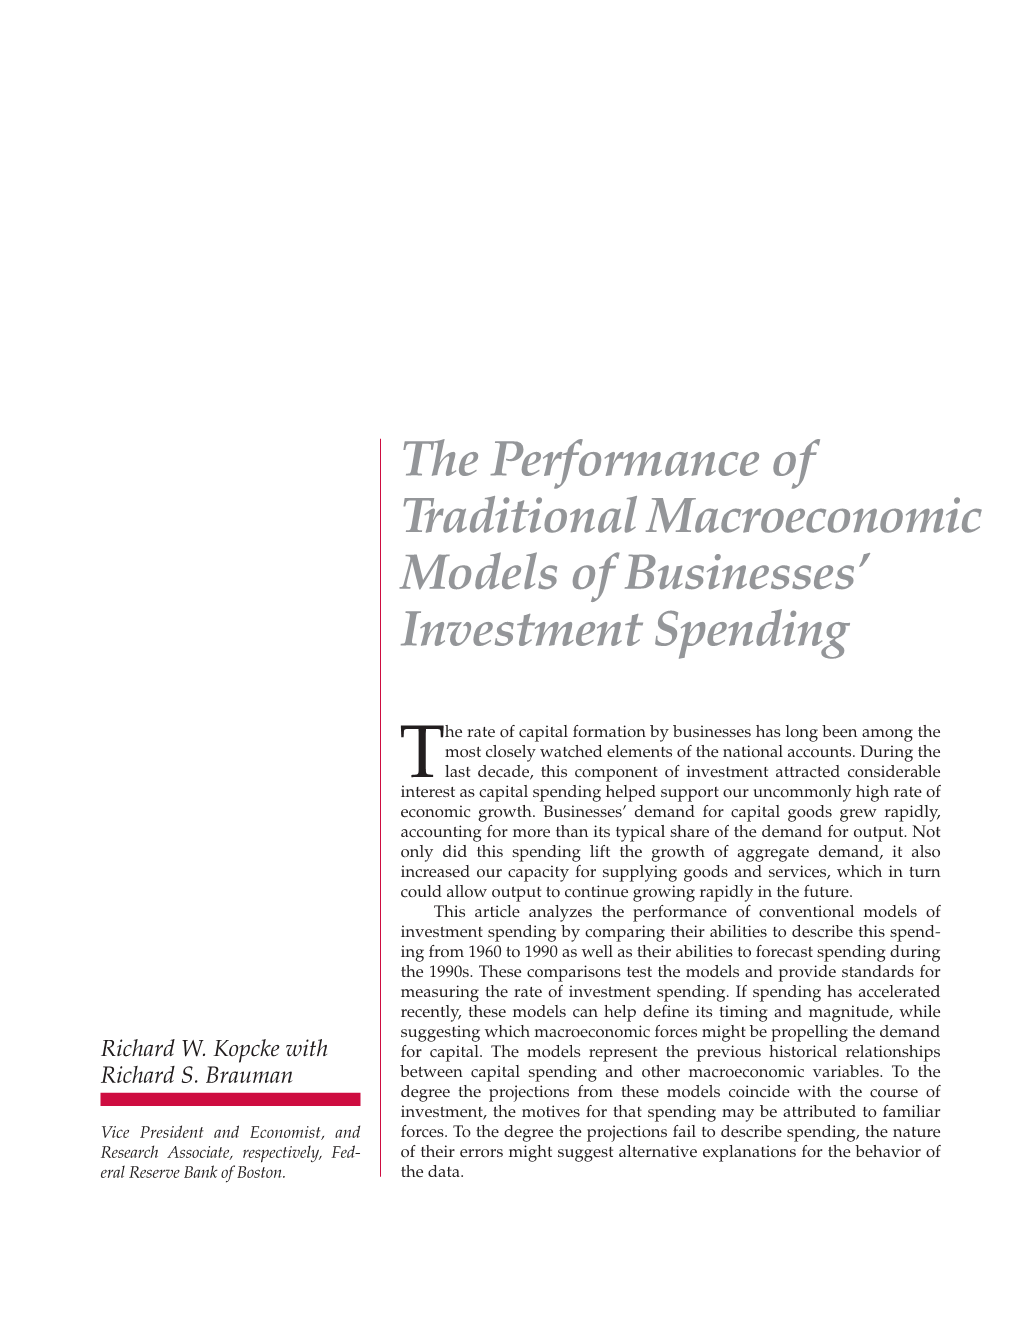 The Performance of Traditional Macroeconomic Models of Businesses’ Investment Spending